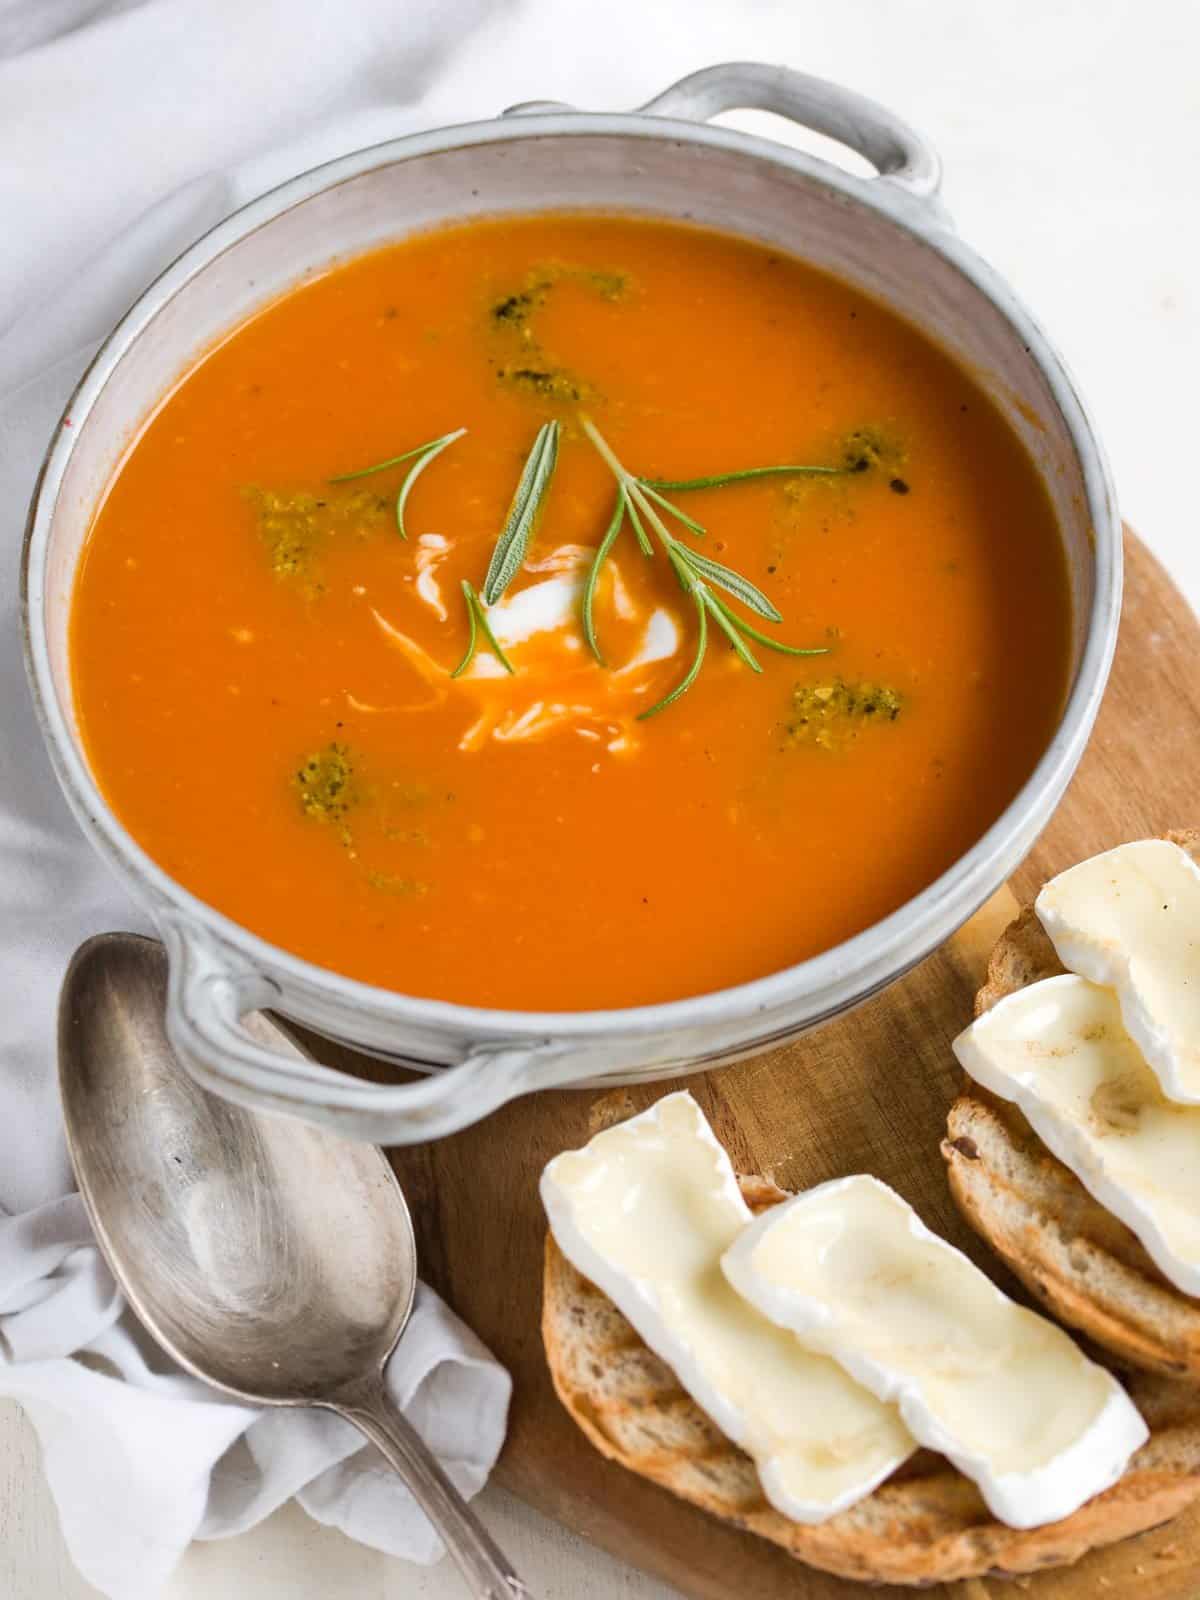 Fresh tomato soup served in a bowl with cheesetoast.